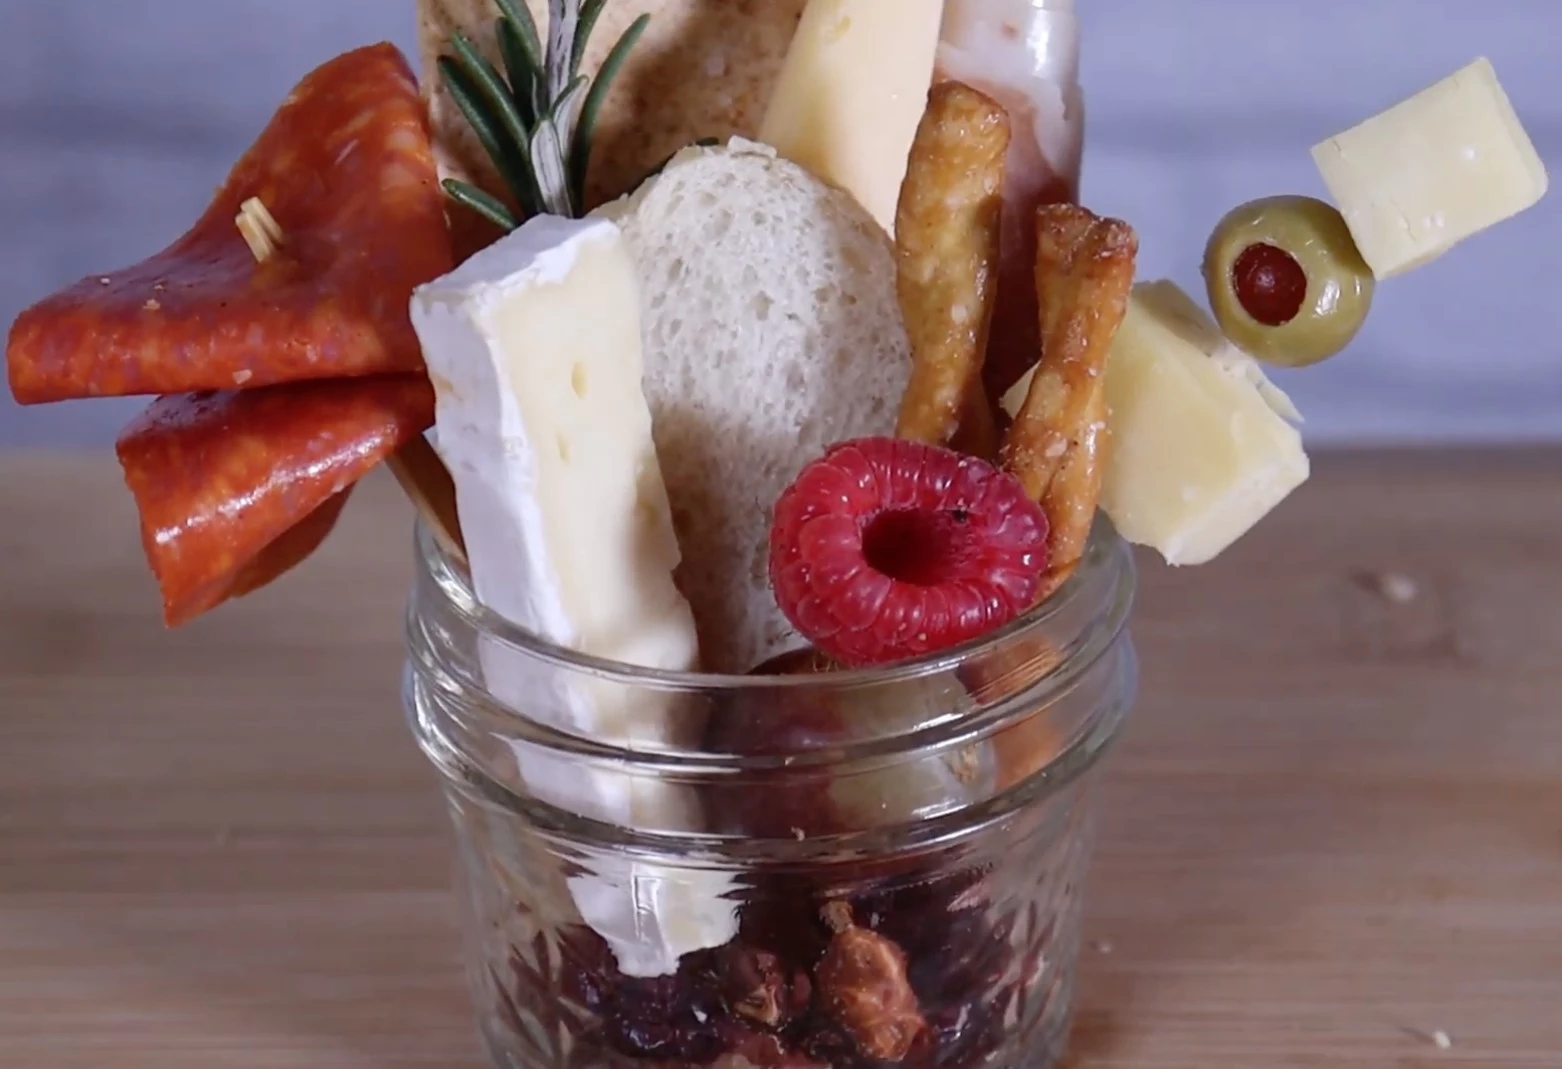 Charcuterie On the Go? The Internet is Loving the Snacklebox